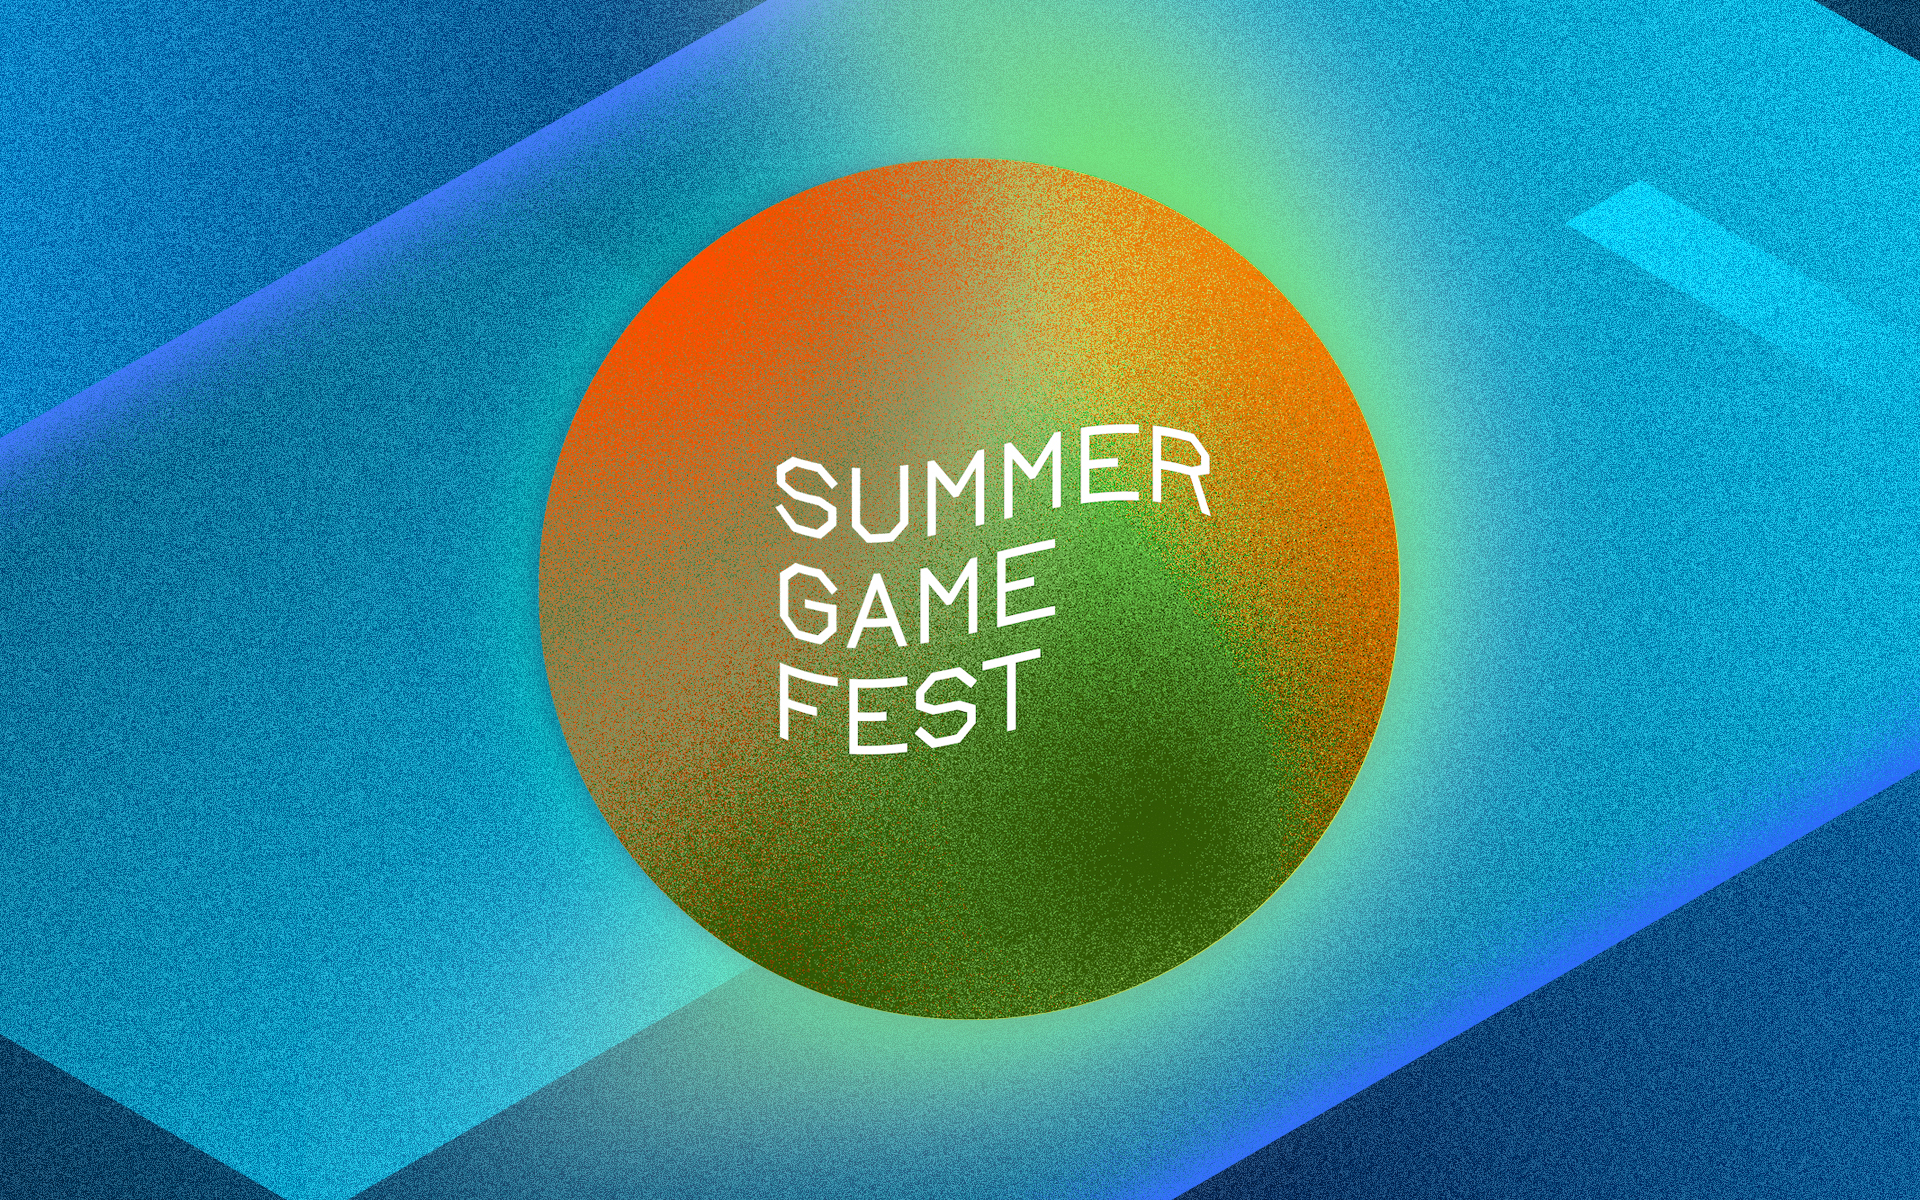 Artwork of the Summer Game Fest logo on an abstract, angled background